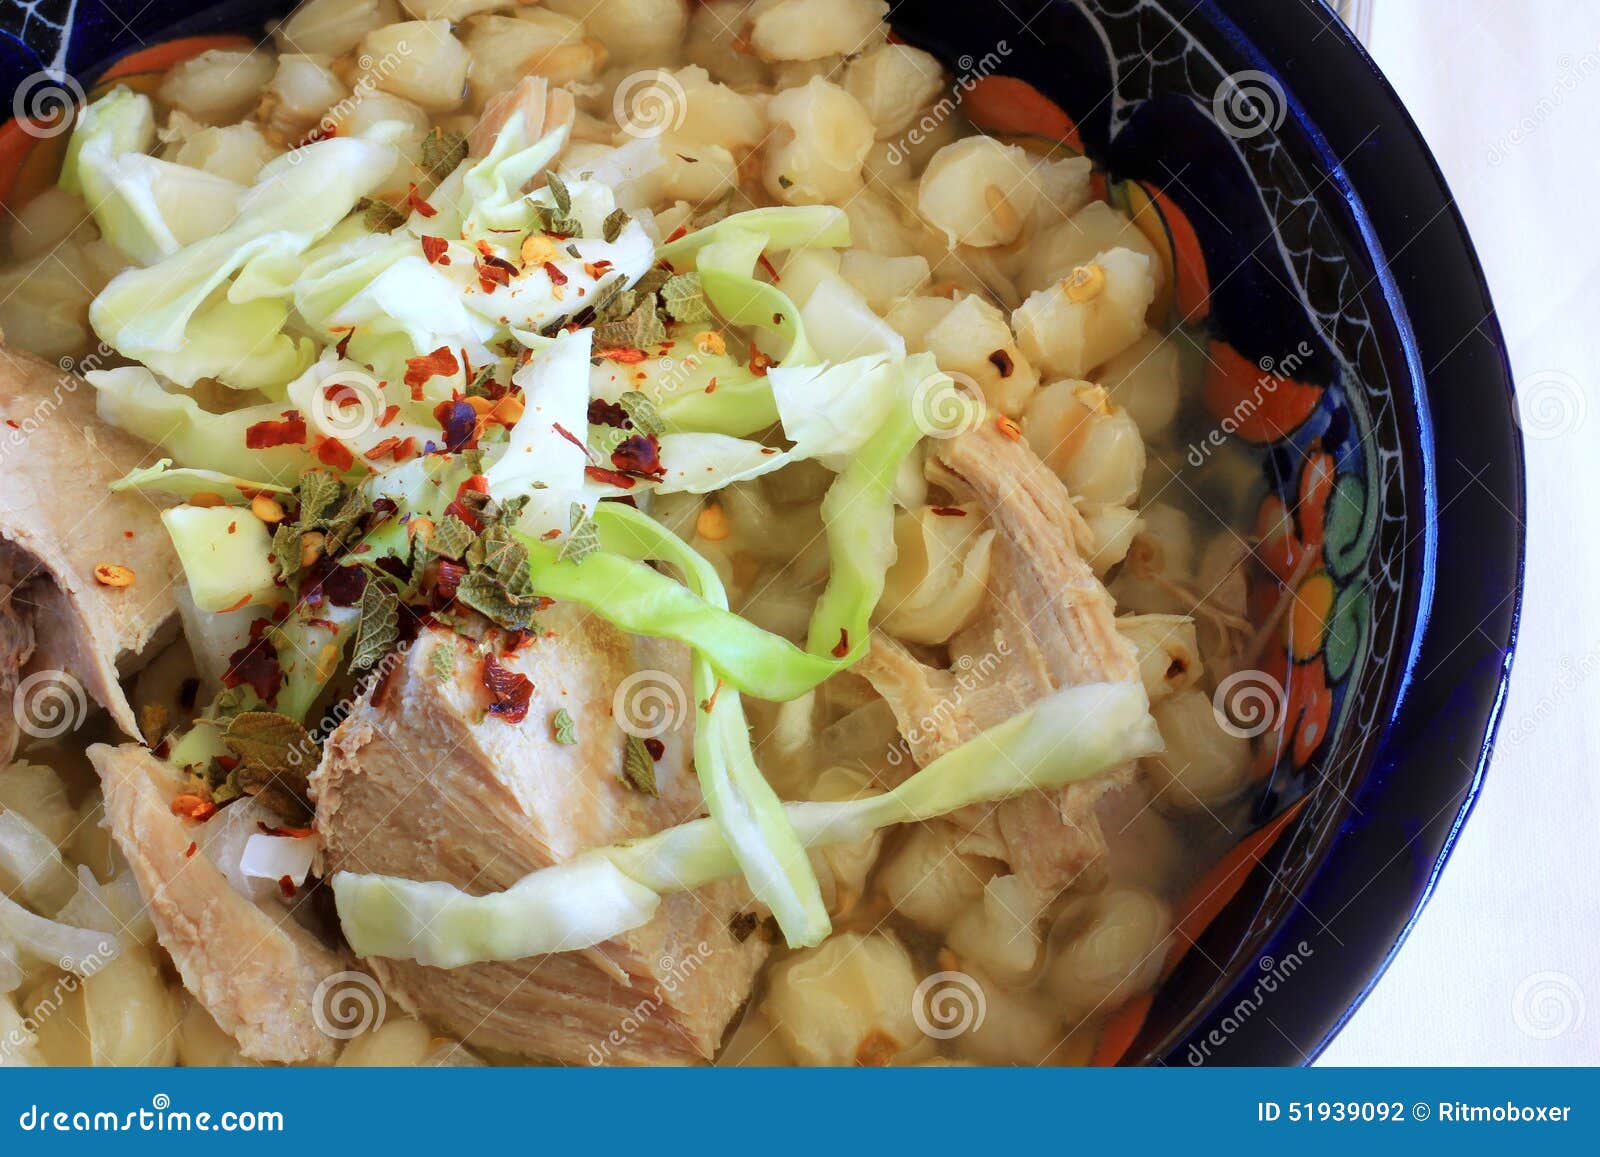 mexican pozole pork and hominy soup